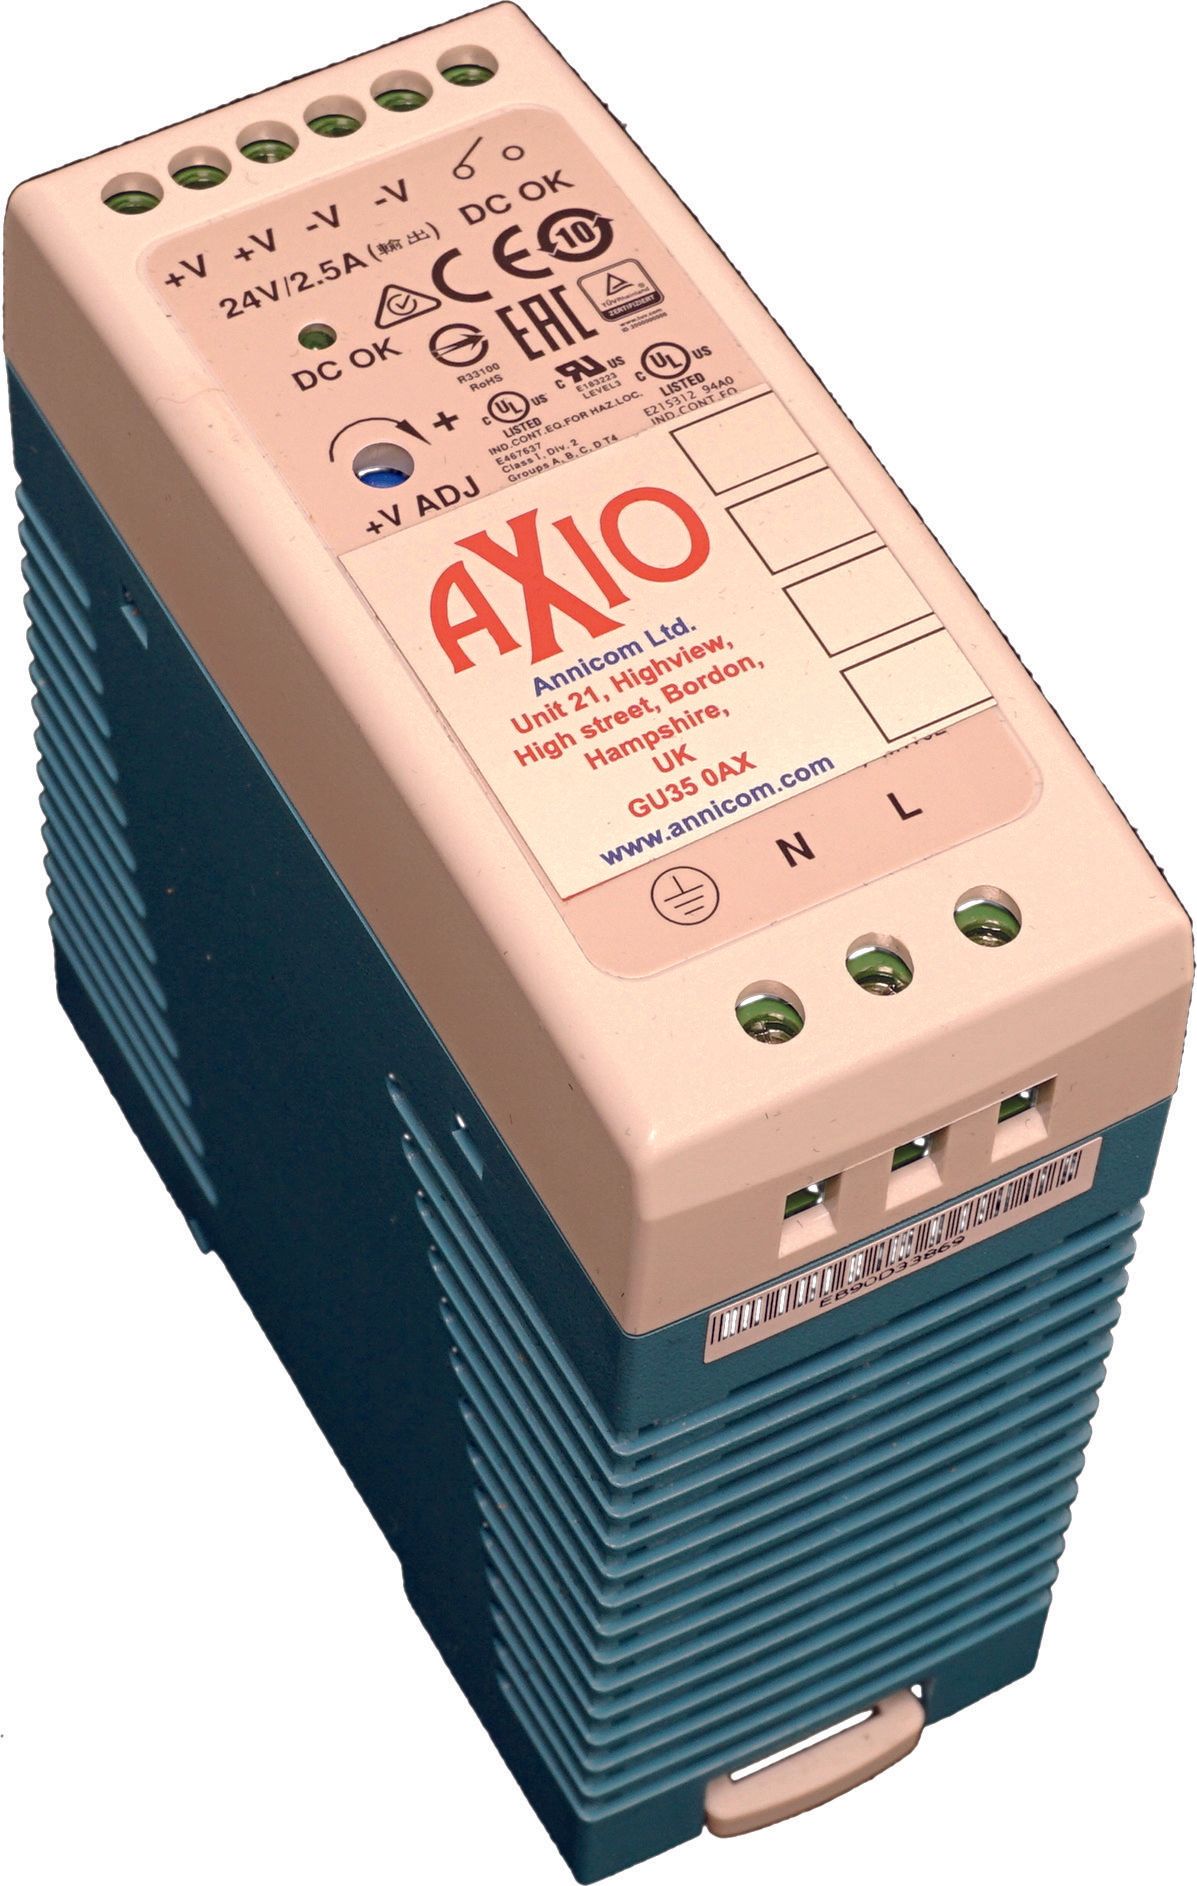 AX-PS-DR-60 230VAC TO 12/24VDC POWER SUPPLY